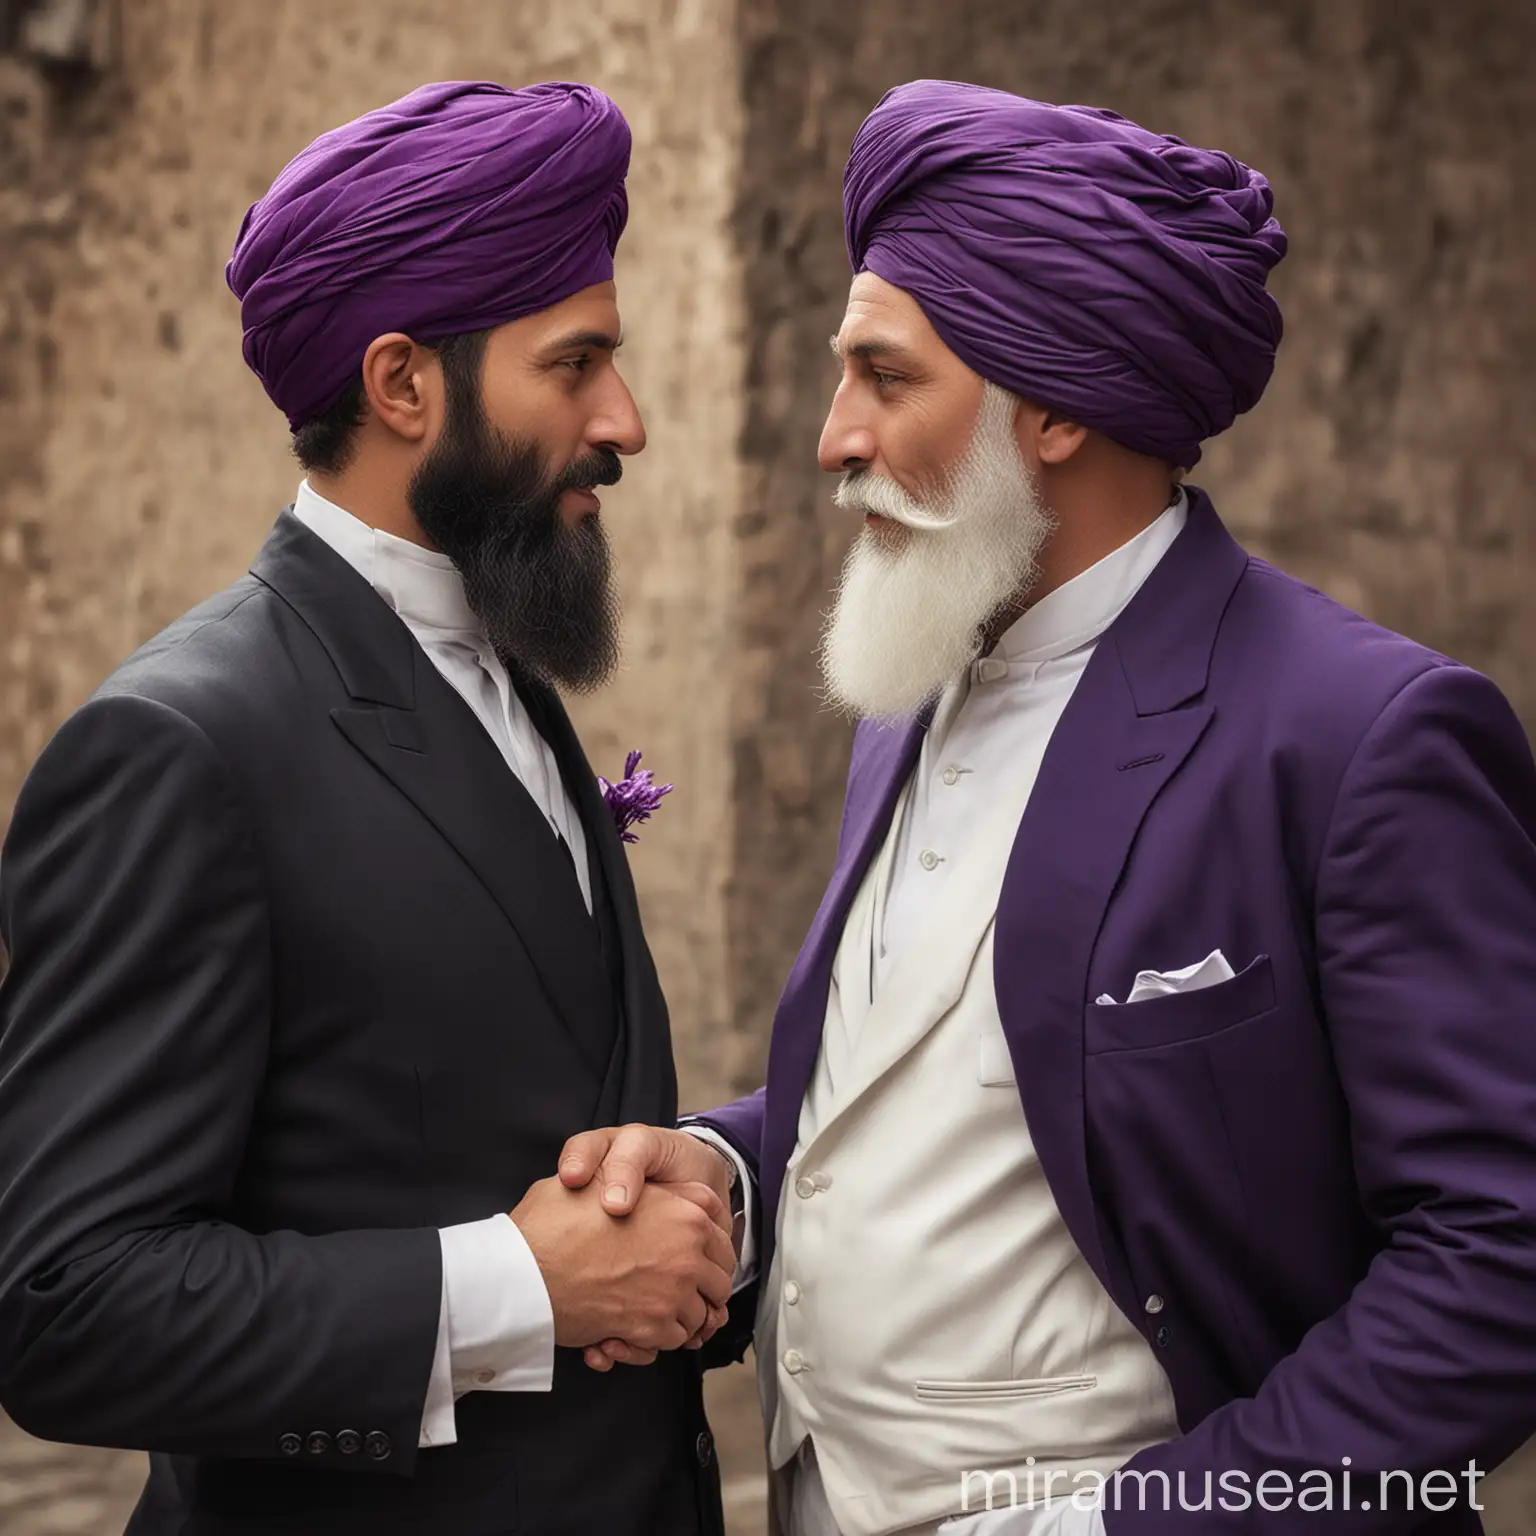 on the left western man with elegant black suit without turbans and without beard. he shakes hands with a genius, with white suit, beard under his chin, a purple turban on his head. they look each other in the eyes
only one must have a beard